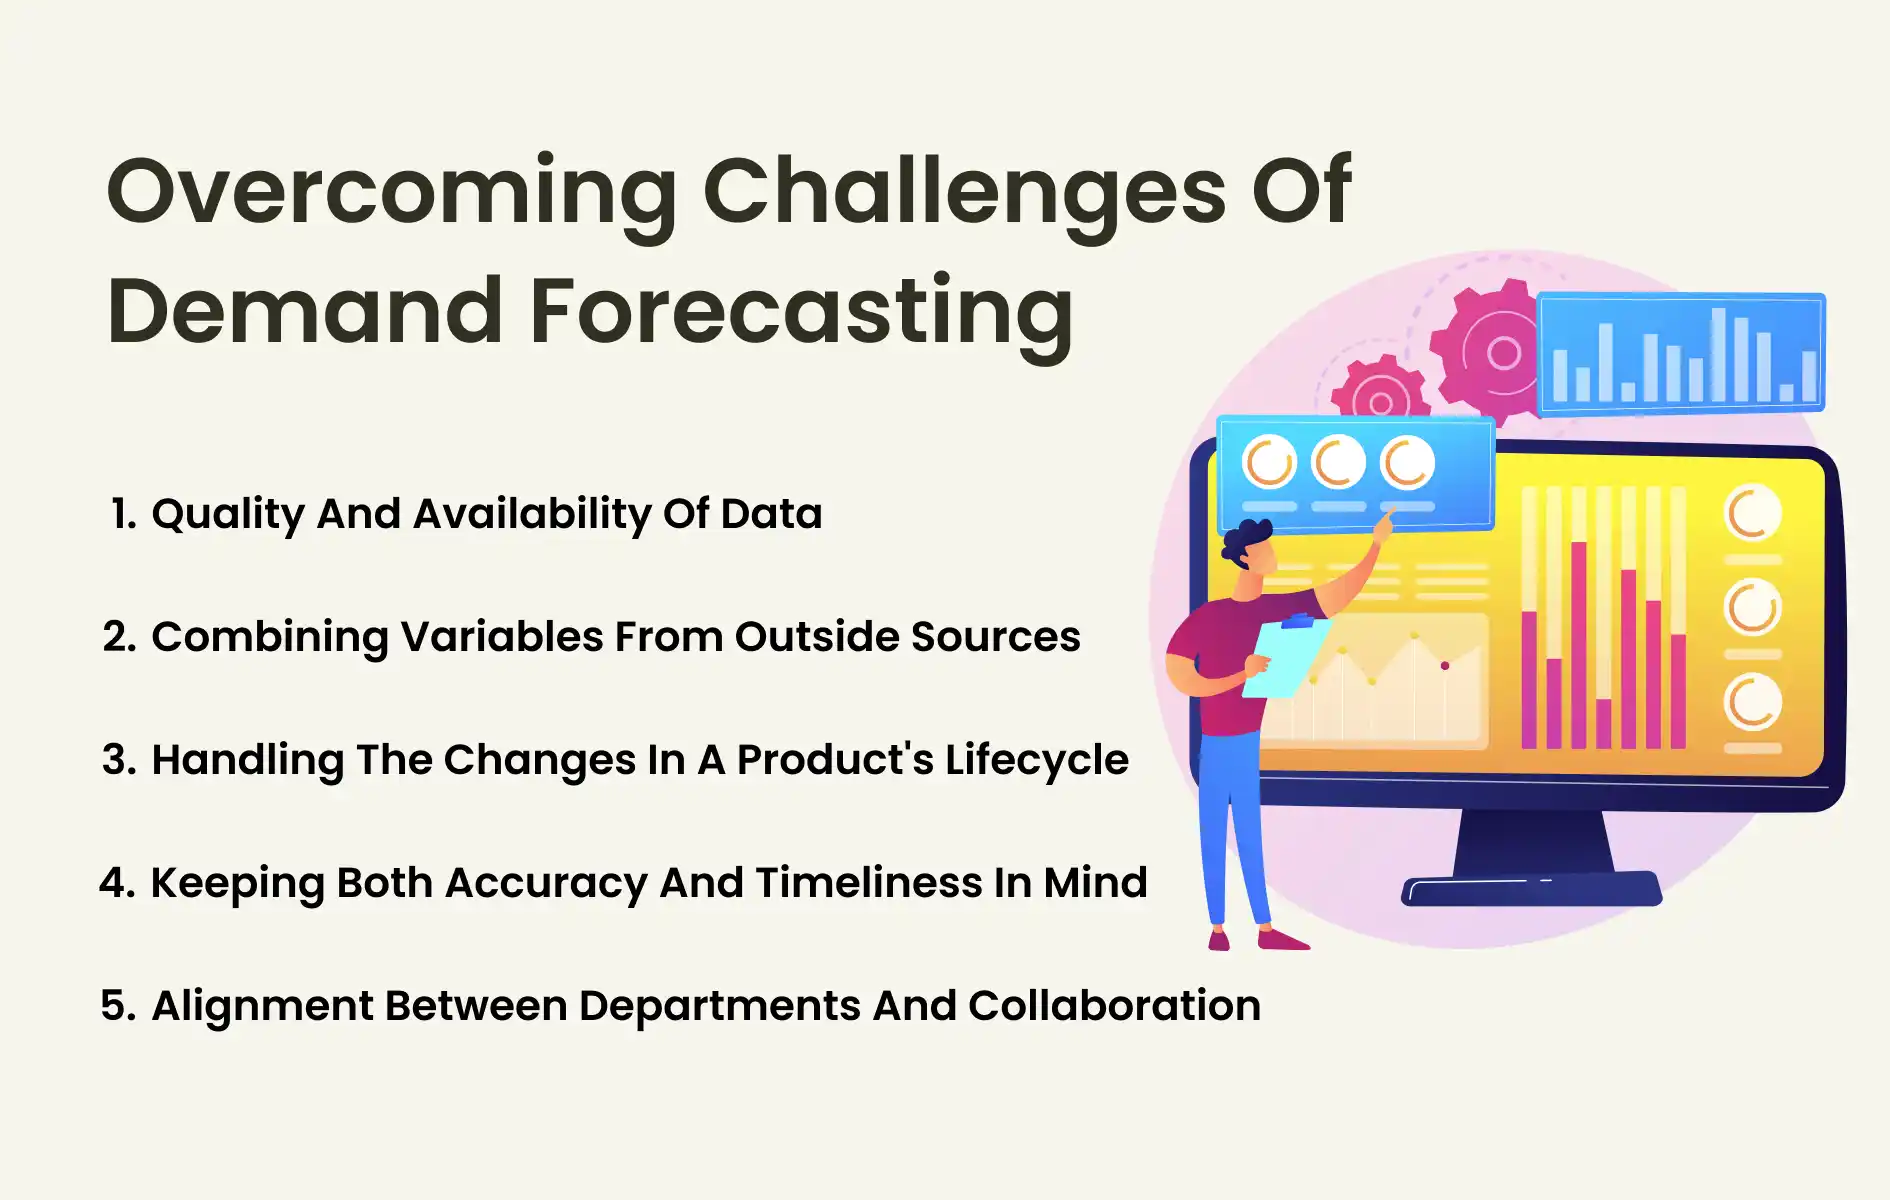 Overcoming Challenges of Demand Forecasting